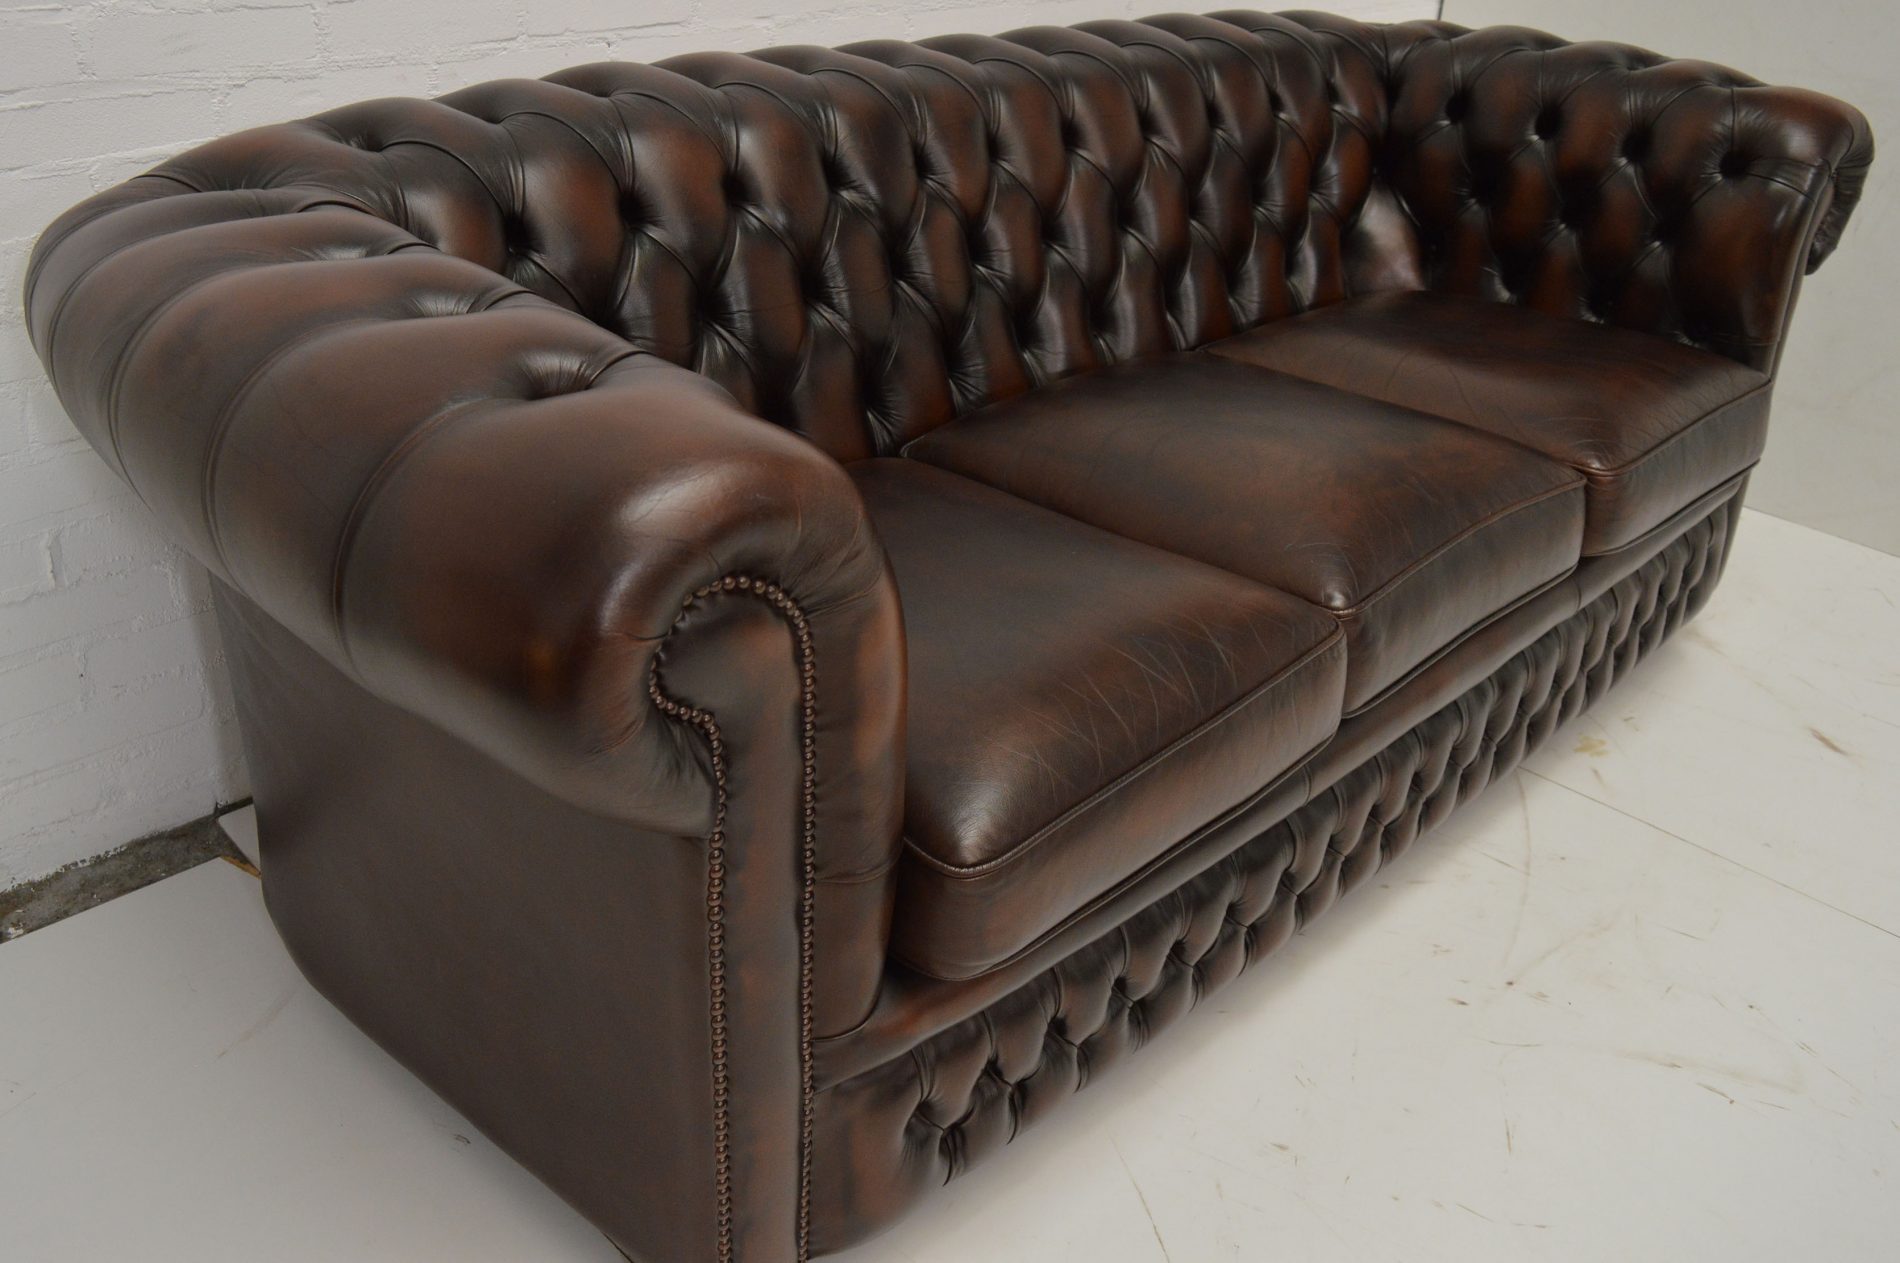 Traditionele drie zits chesterfield bank.